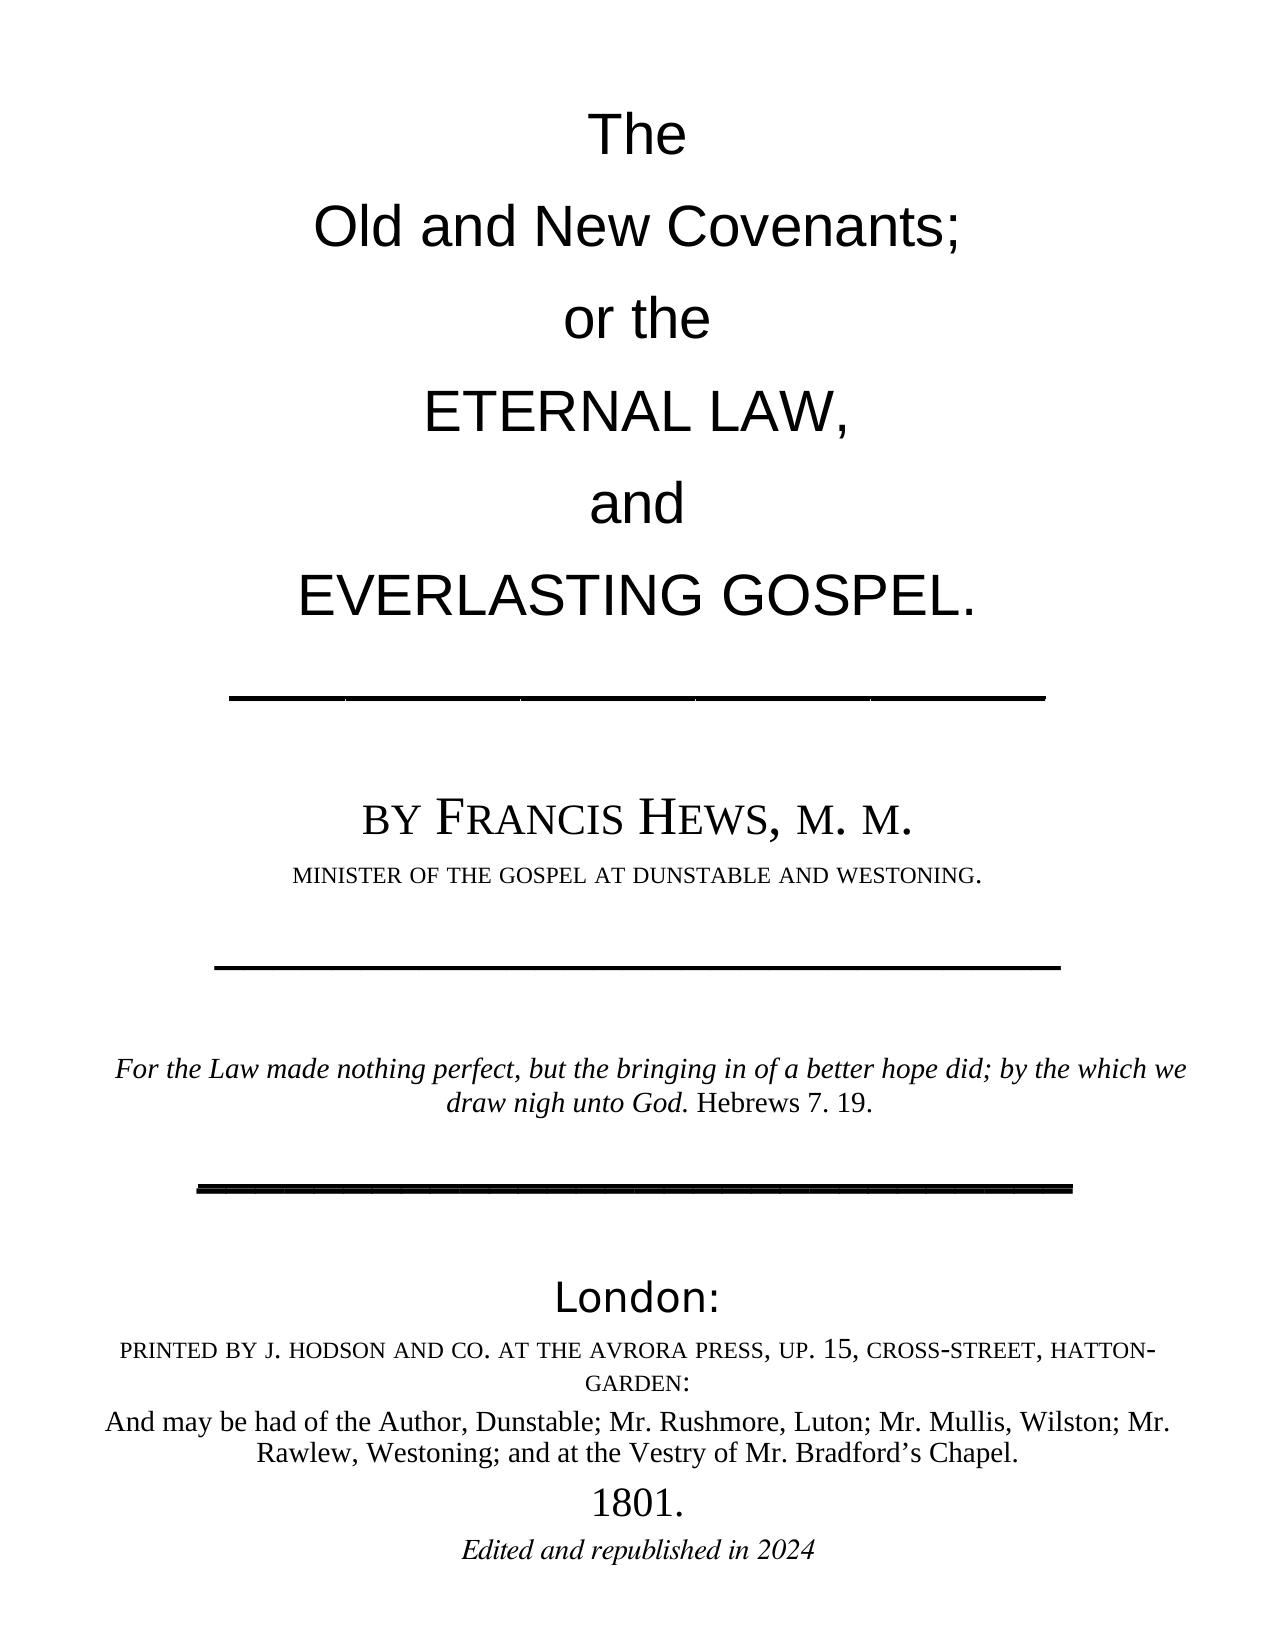 The Old and New Covenants; Or, the Eternal Law and Everlasting Gospel